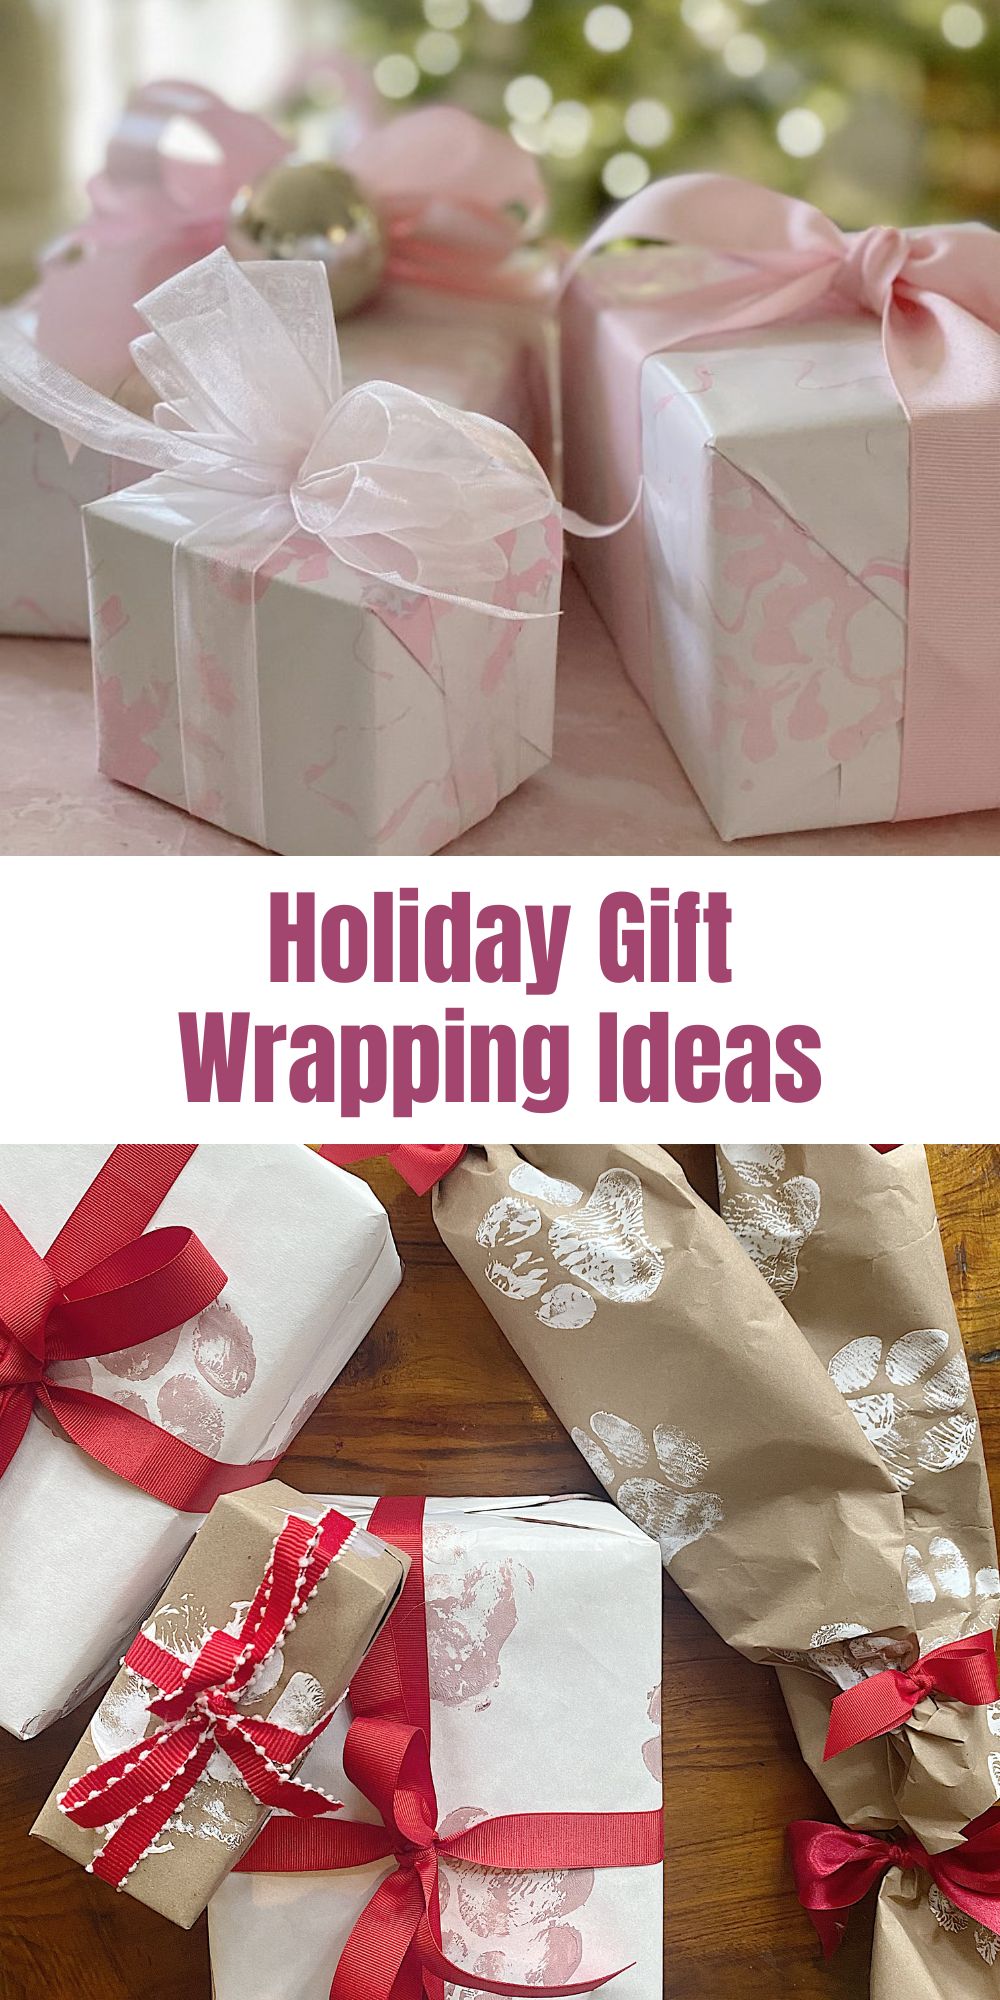 Welcome to day five of Twelve Days of Getting Ready For Christmas. Today I am sharing holiday gift-wrapping ideas.